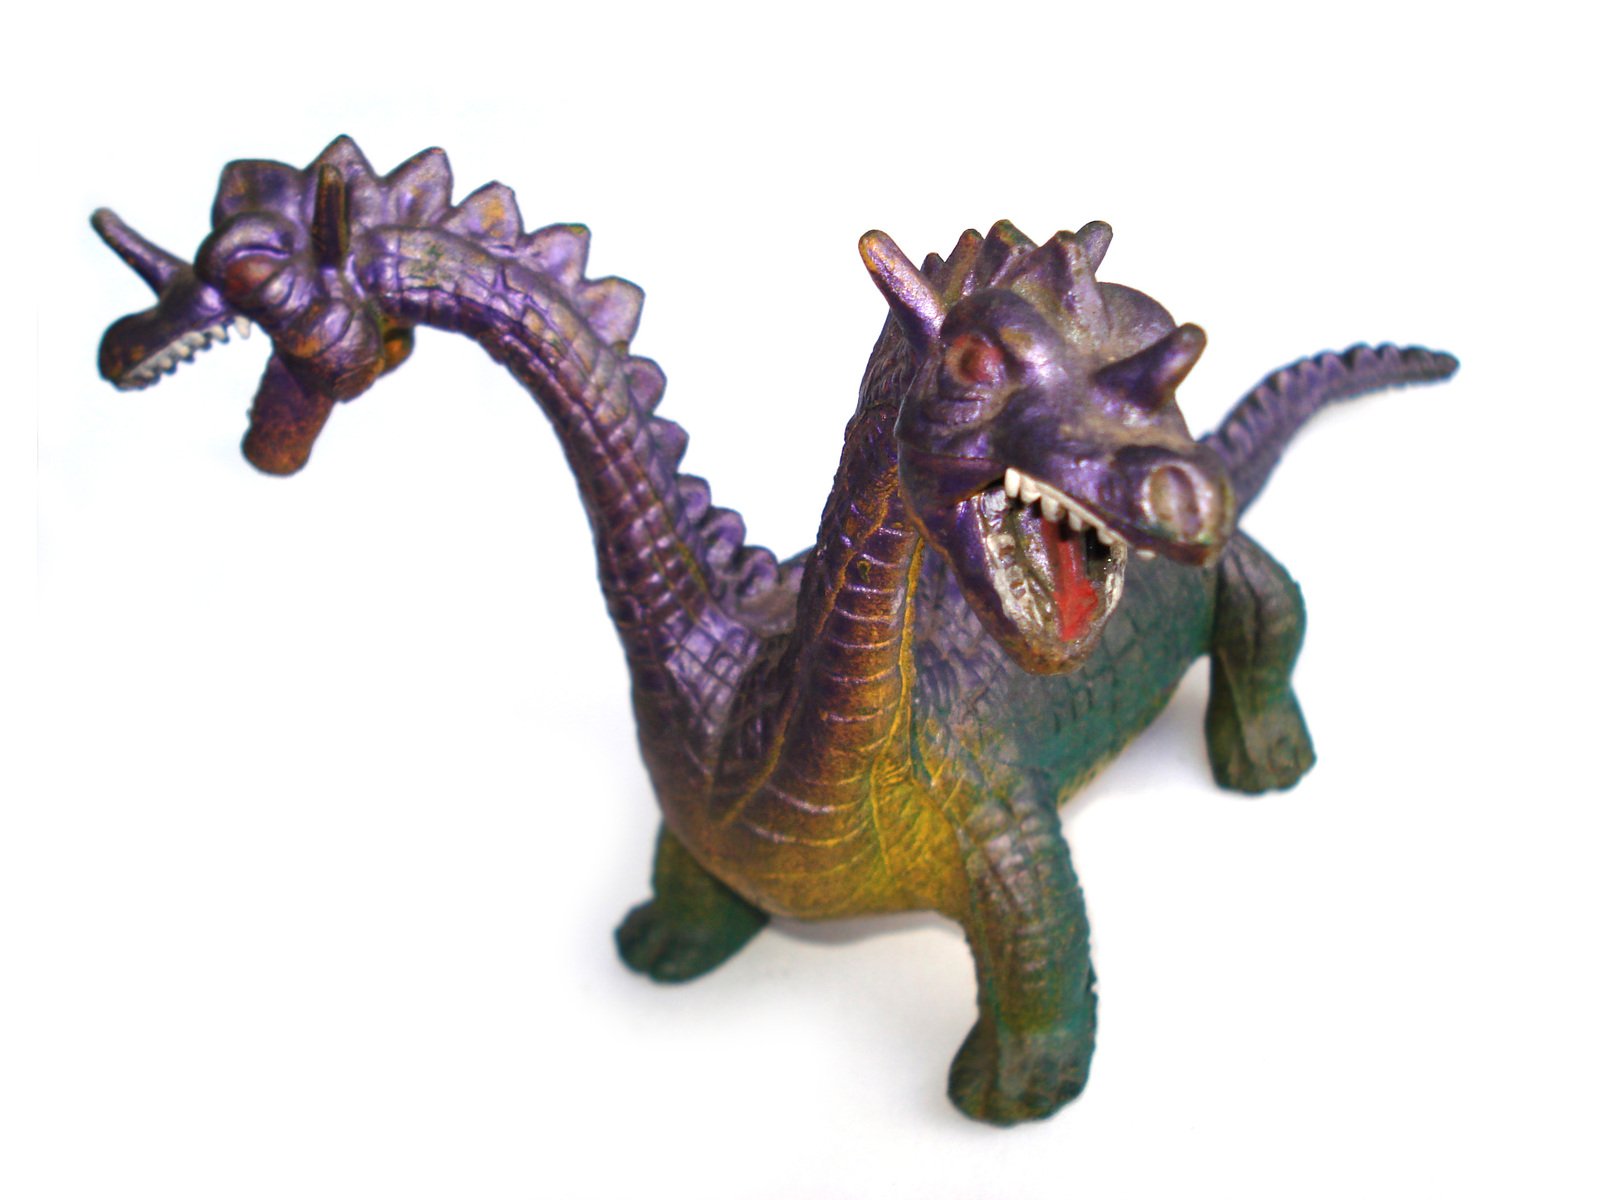 there is a small toy dinosaur with its teeth